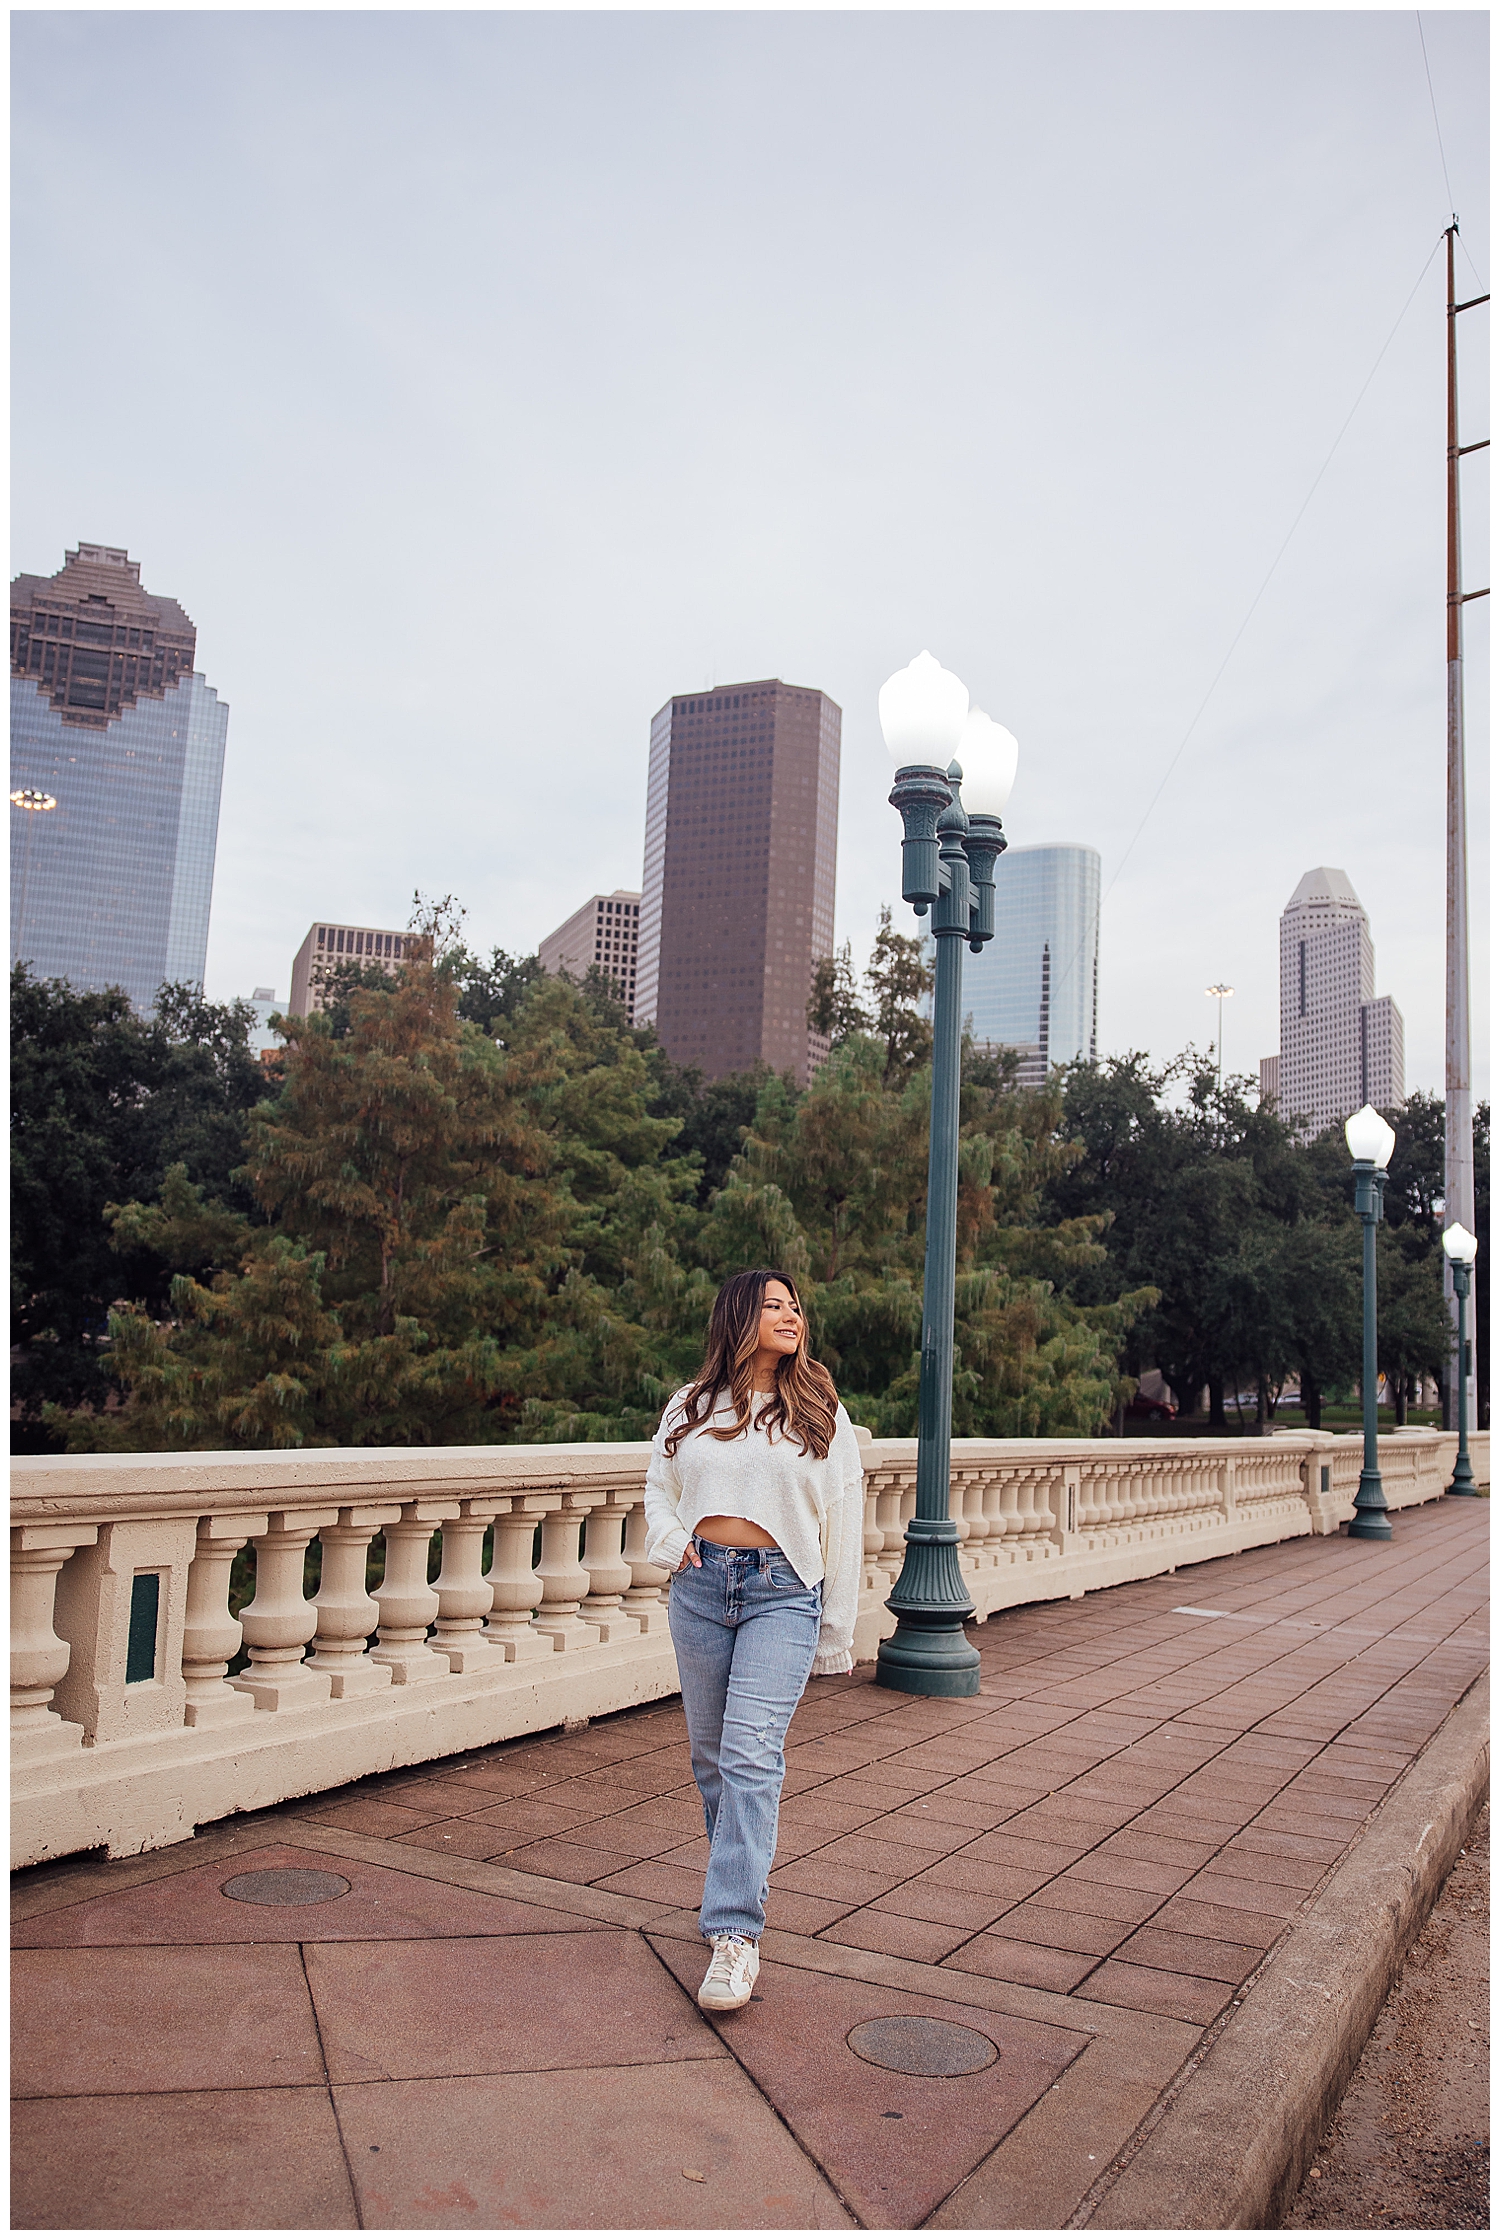 Girl in jeans and white sweater walking on Sabine Street Bridge in front of Houston skyline